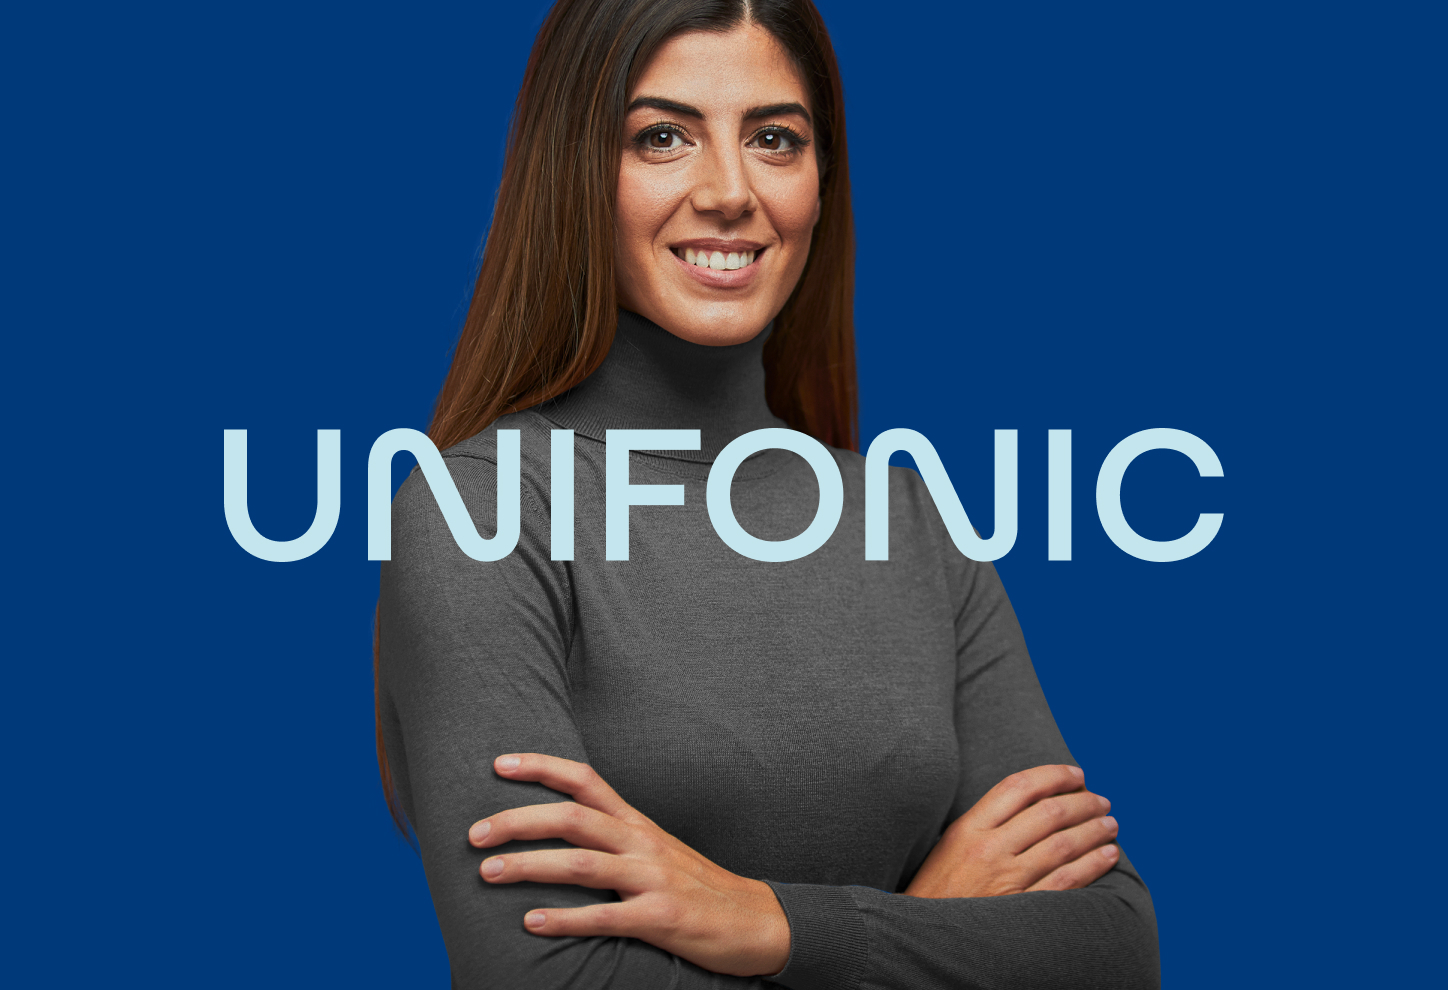 Unifonic Showcases New Brand Vision at LEAP 2022